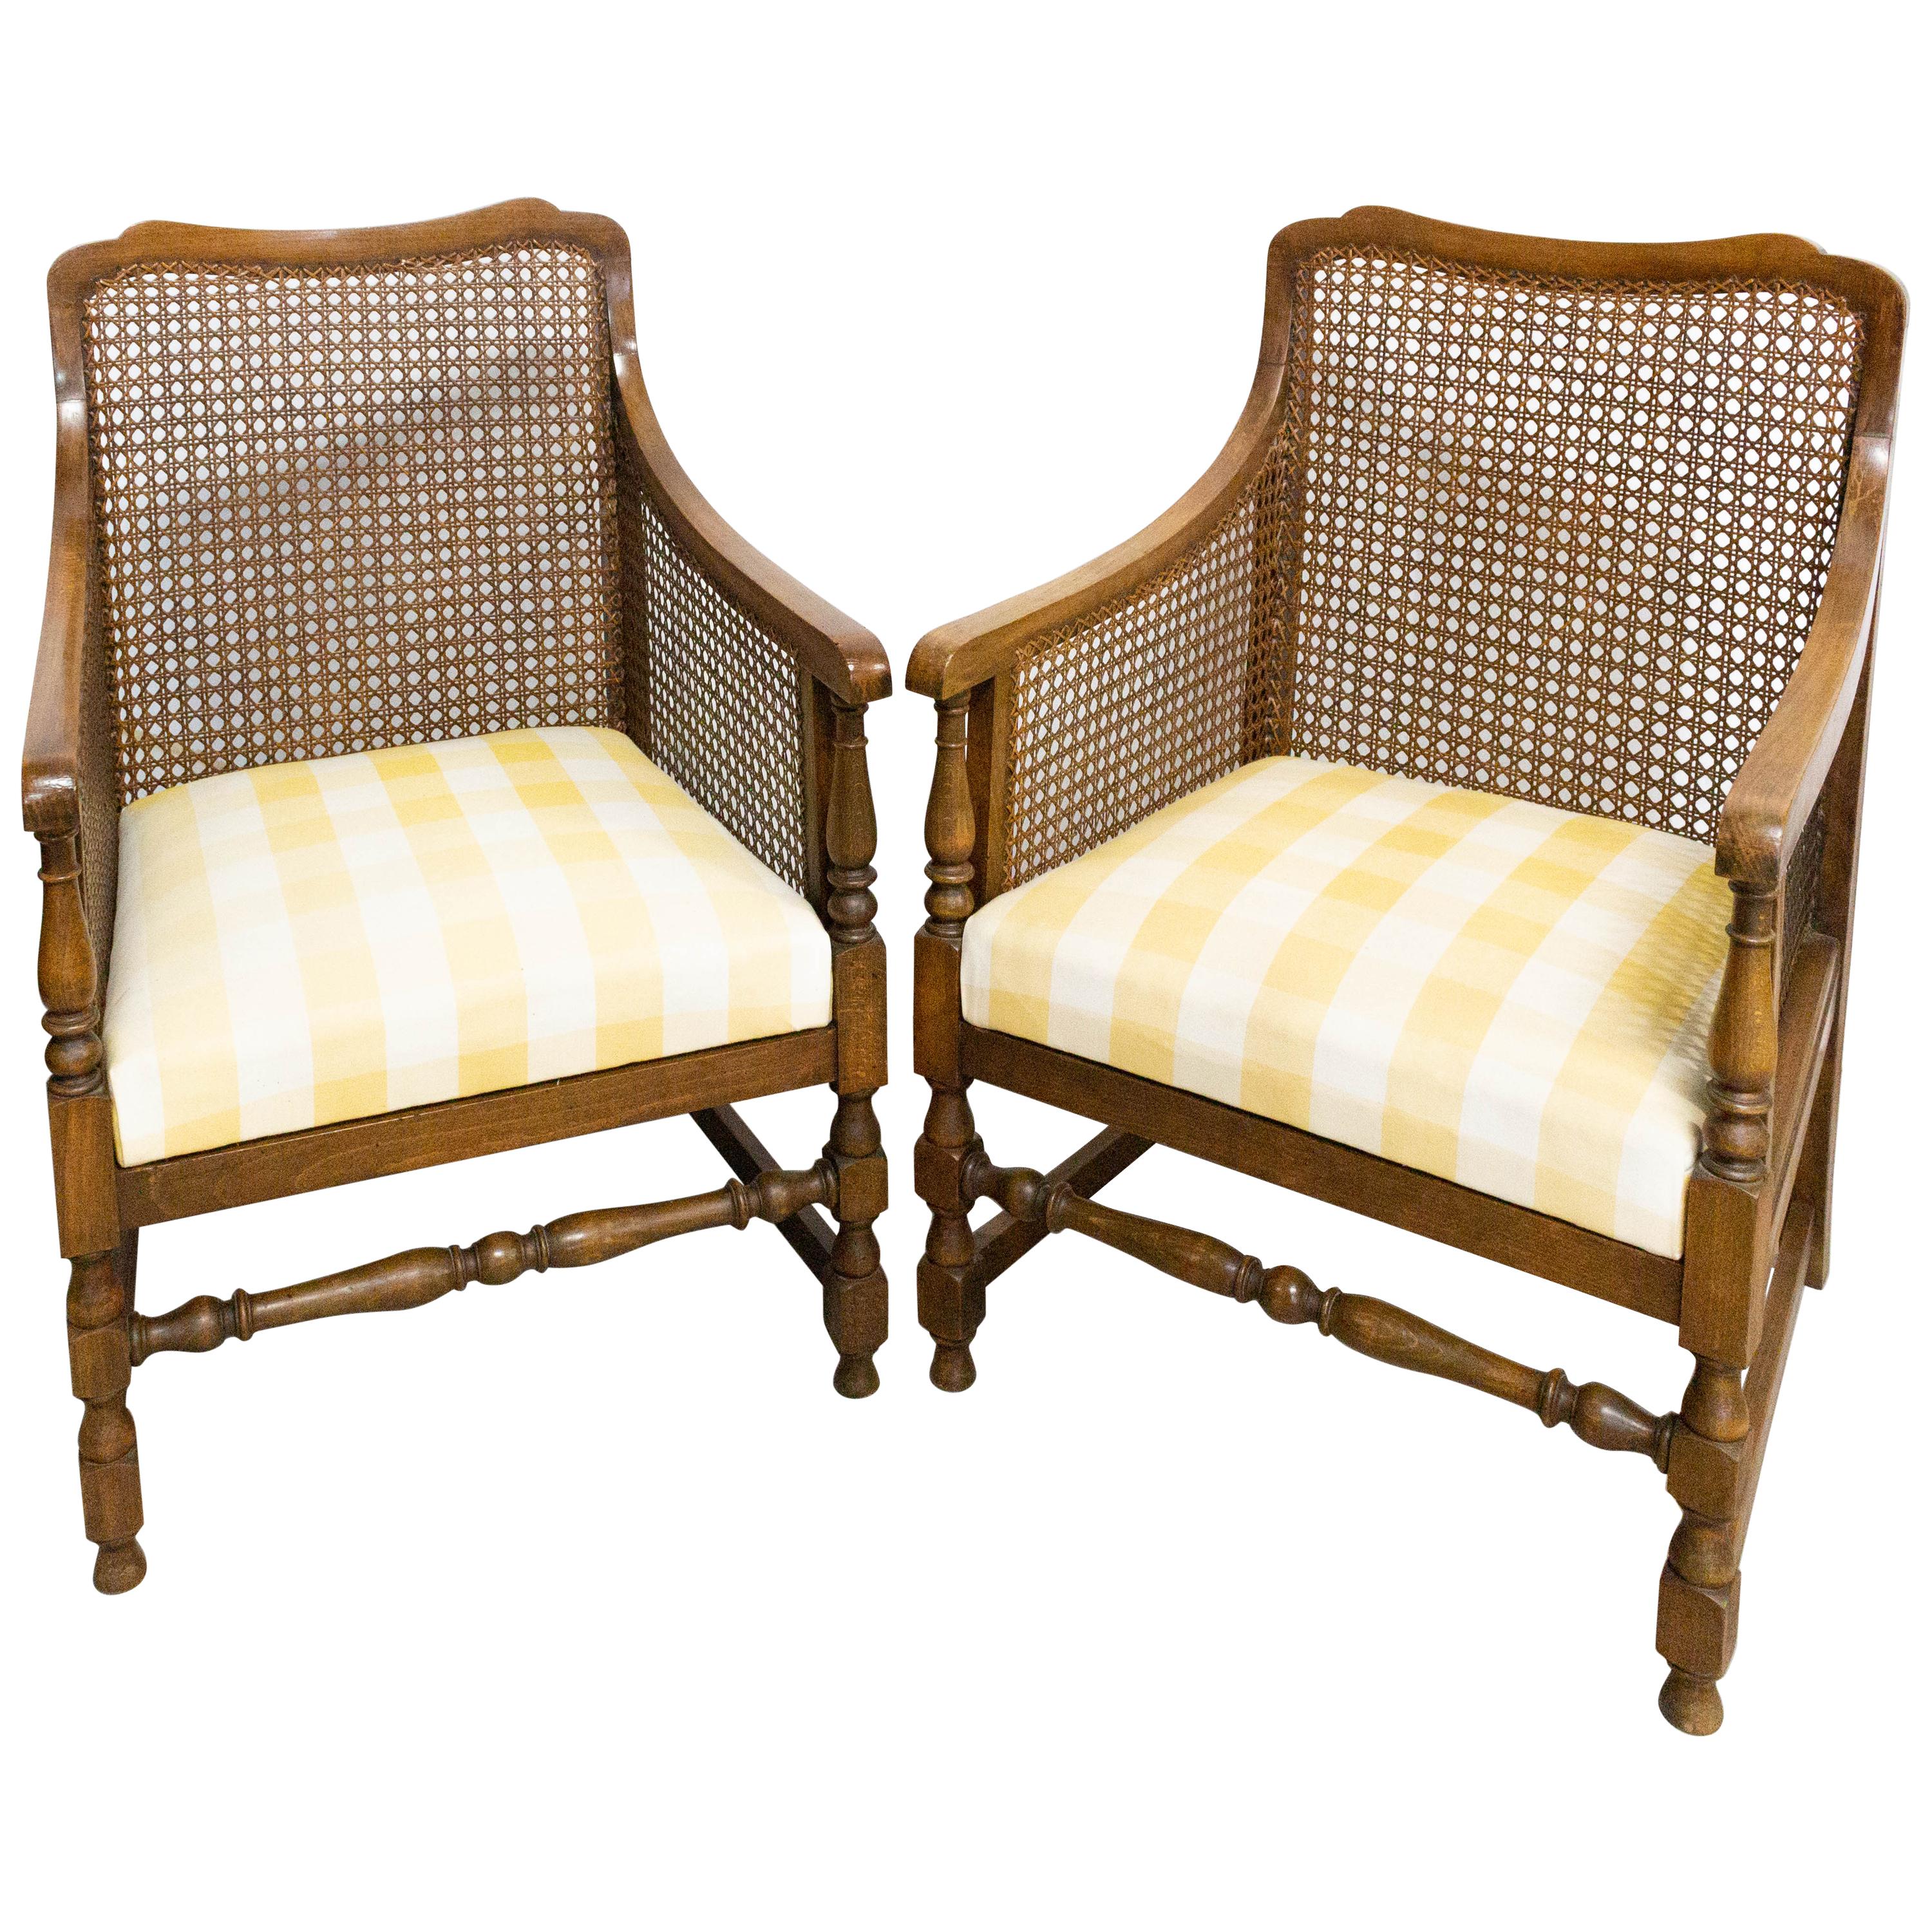 Pair of Caned Armchairs French, Beech Early 20th Century